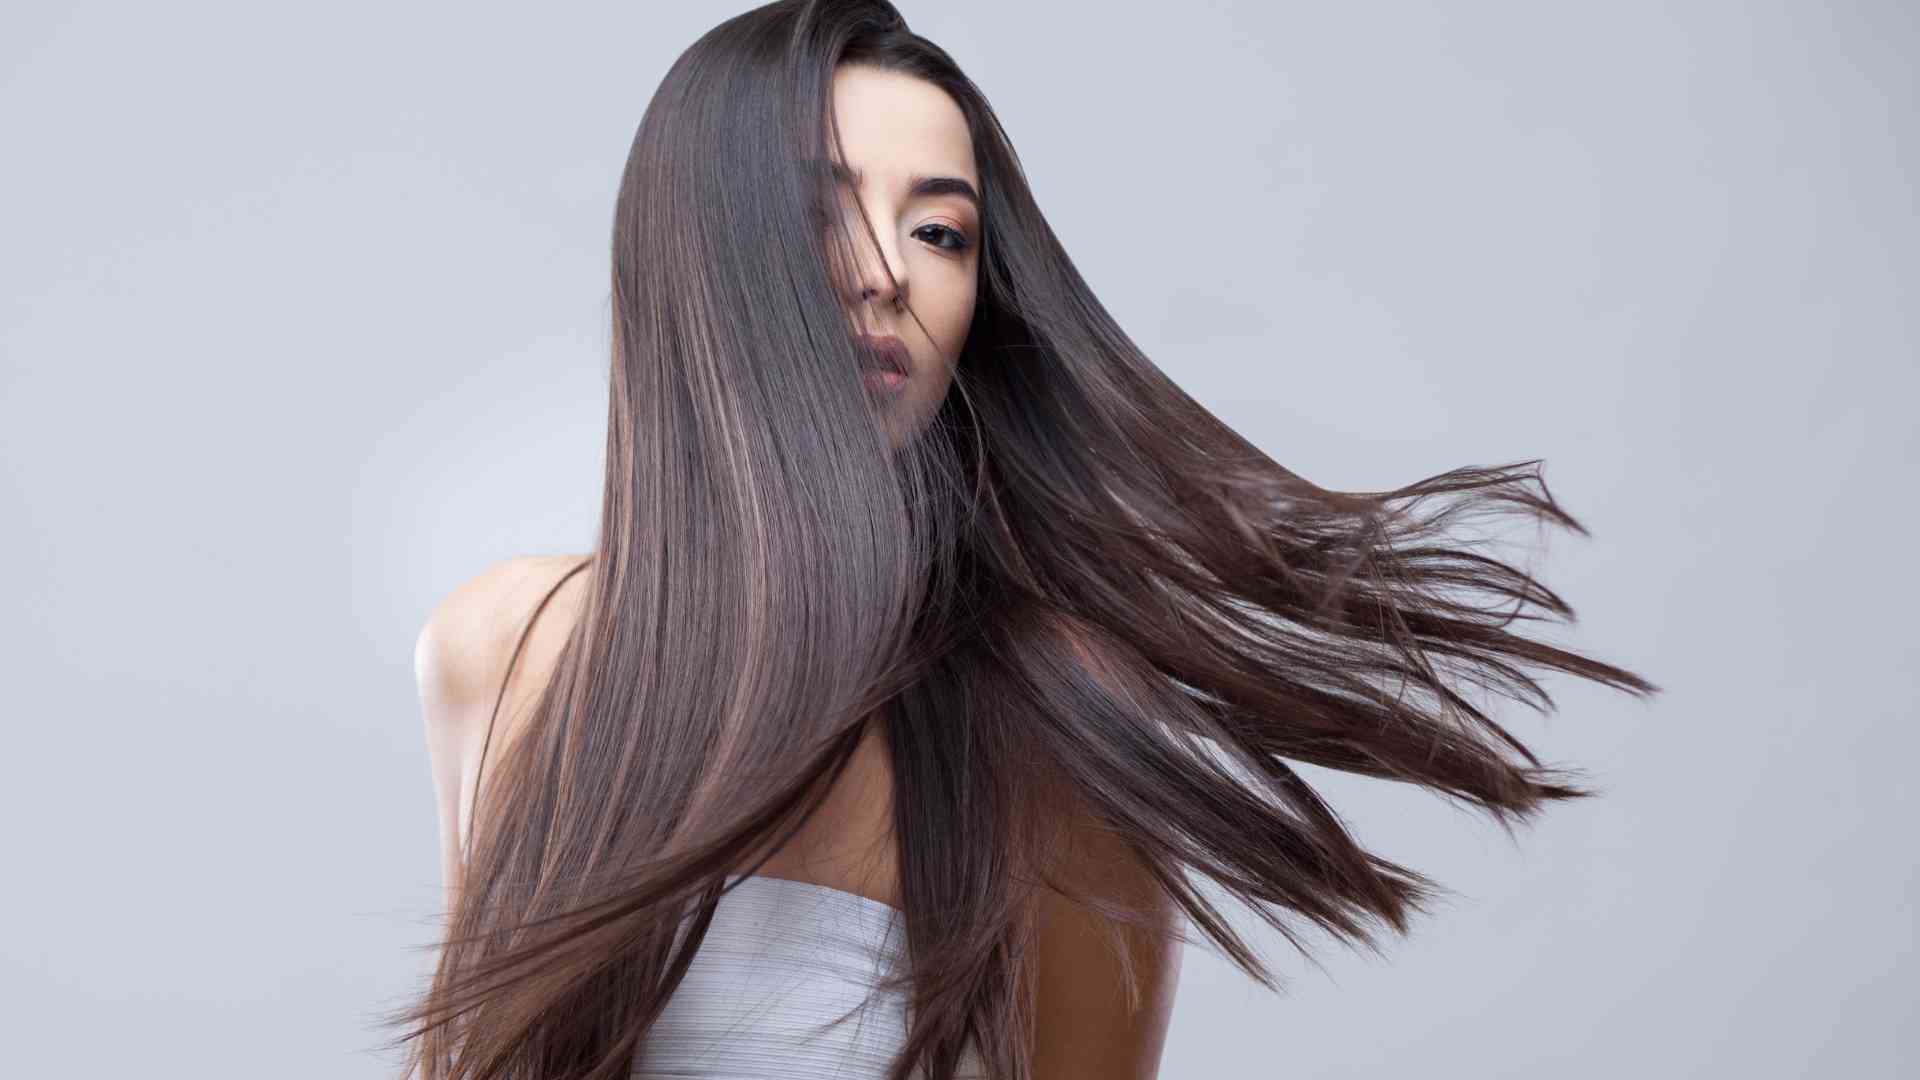 What lesser-known vitamins and minerals are crucial for maintaining healthy hair